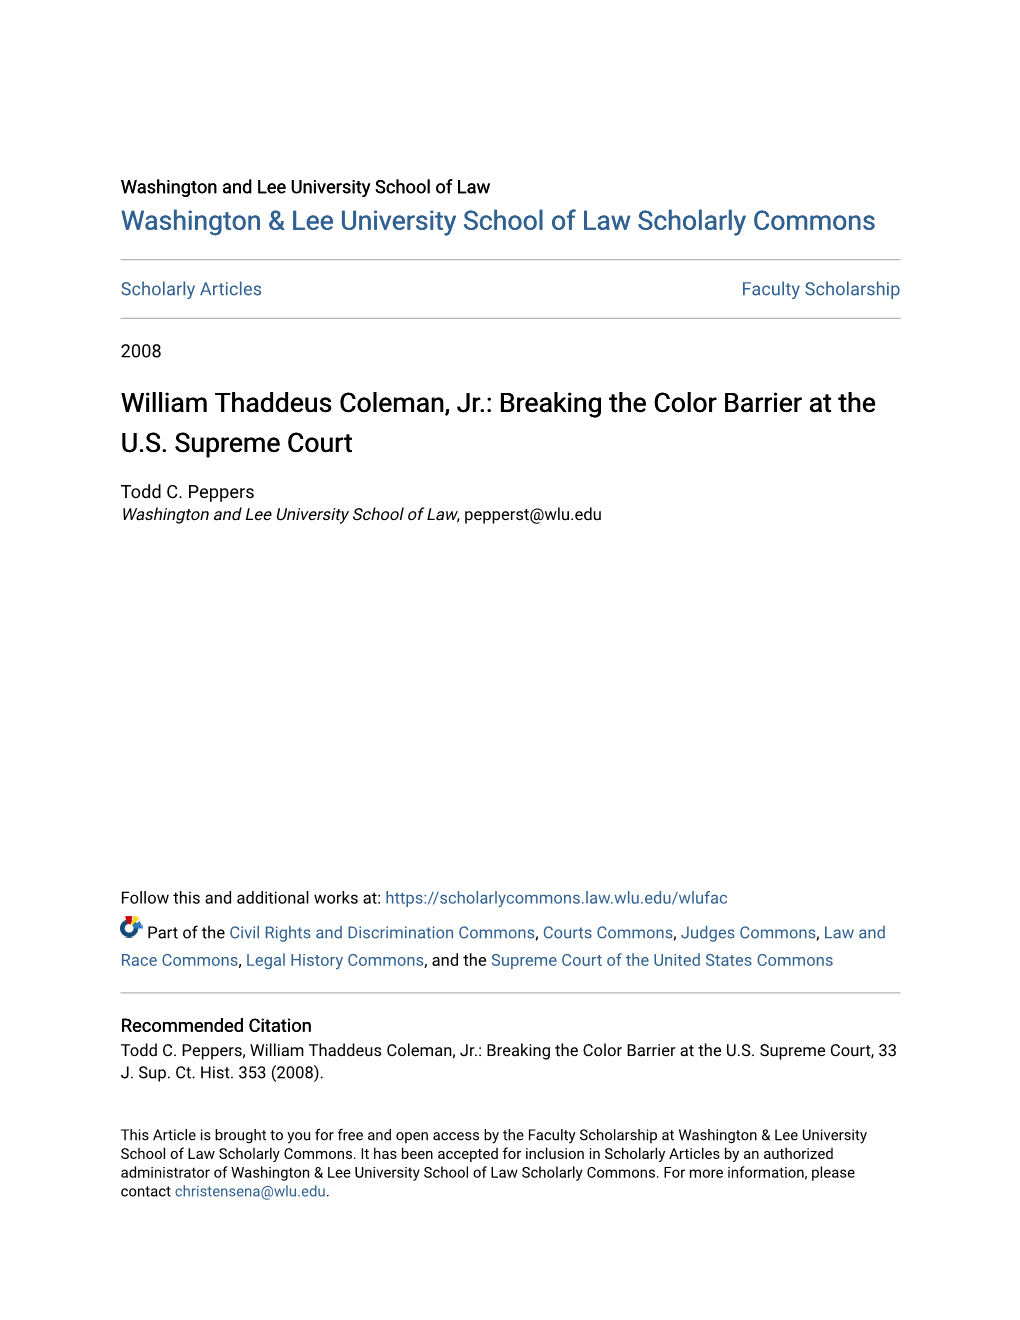 William Thaddeus Coleman, Jr.: Breaking the Color Barrier at the U.S